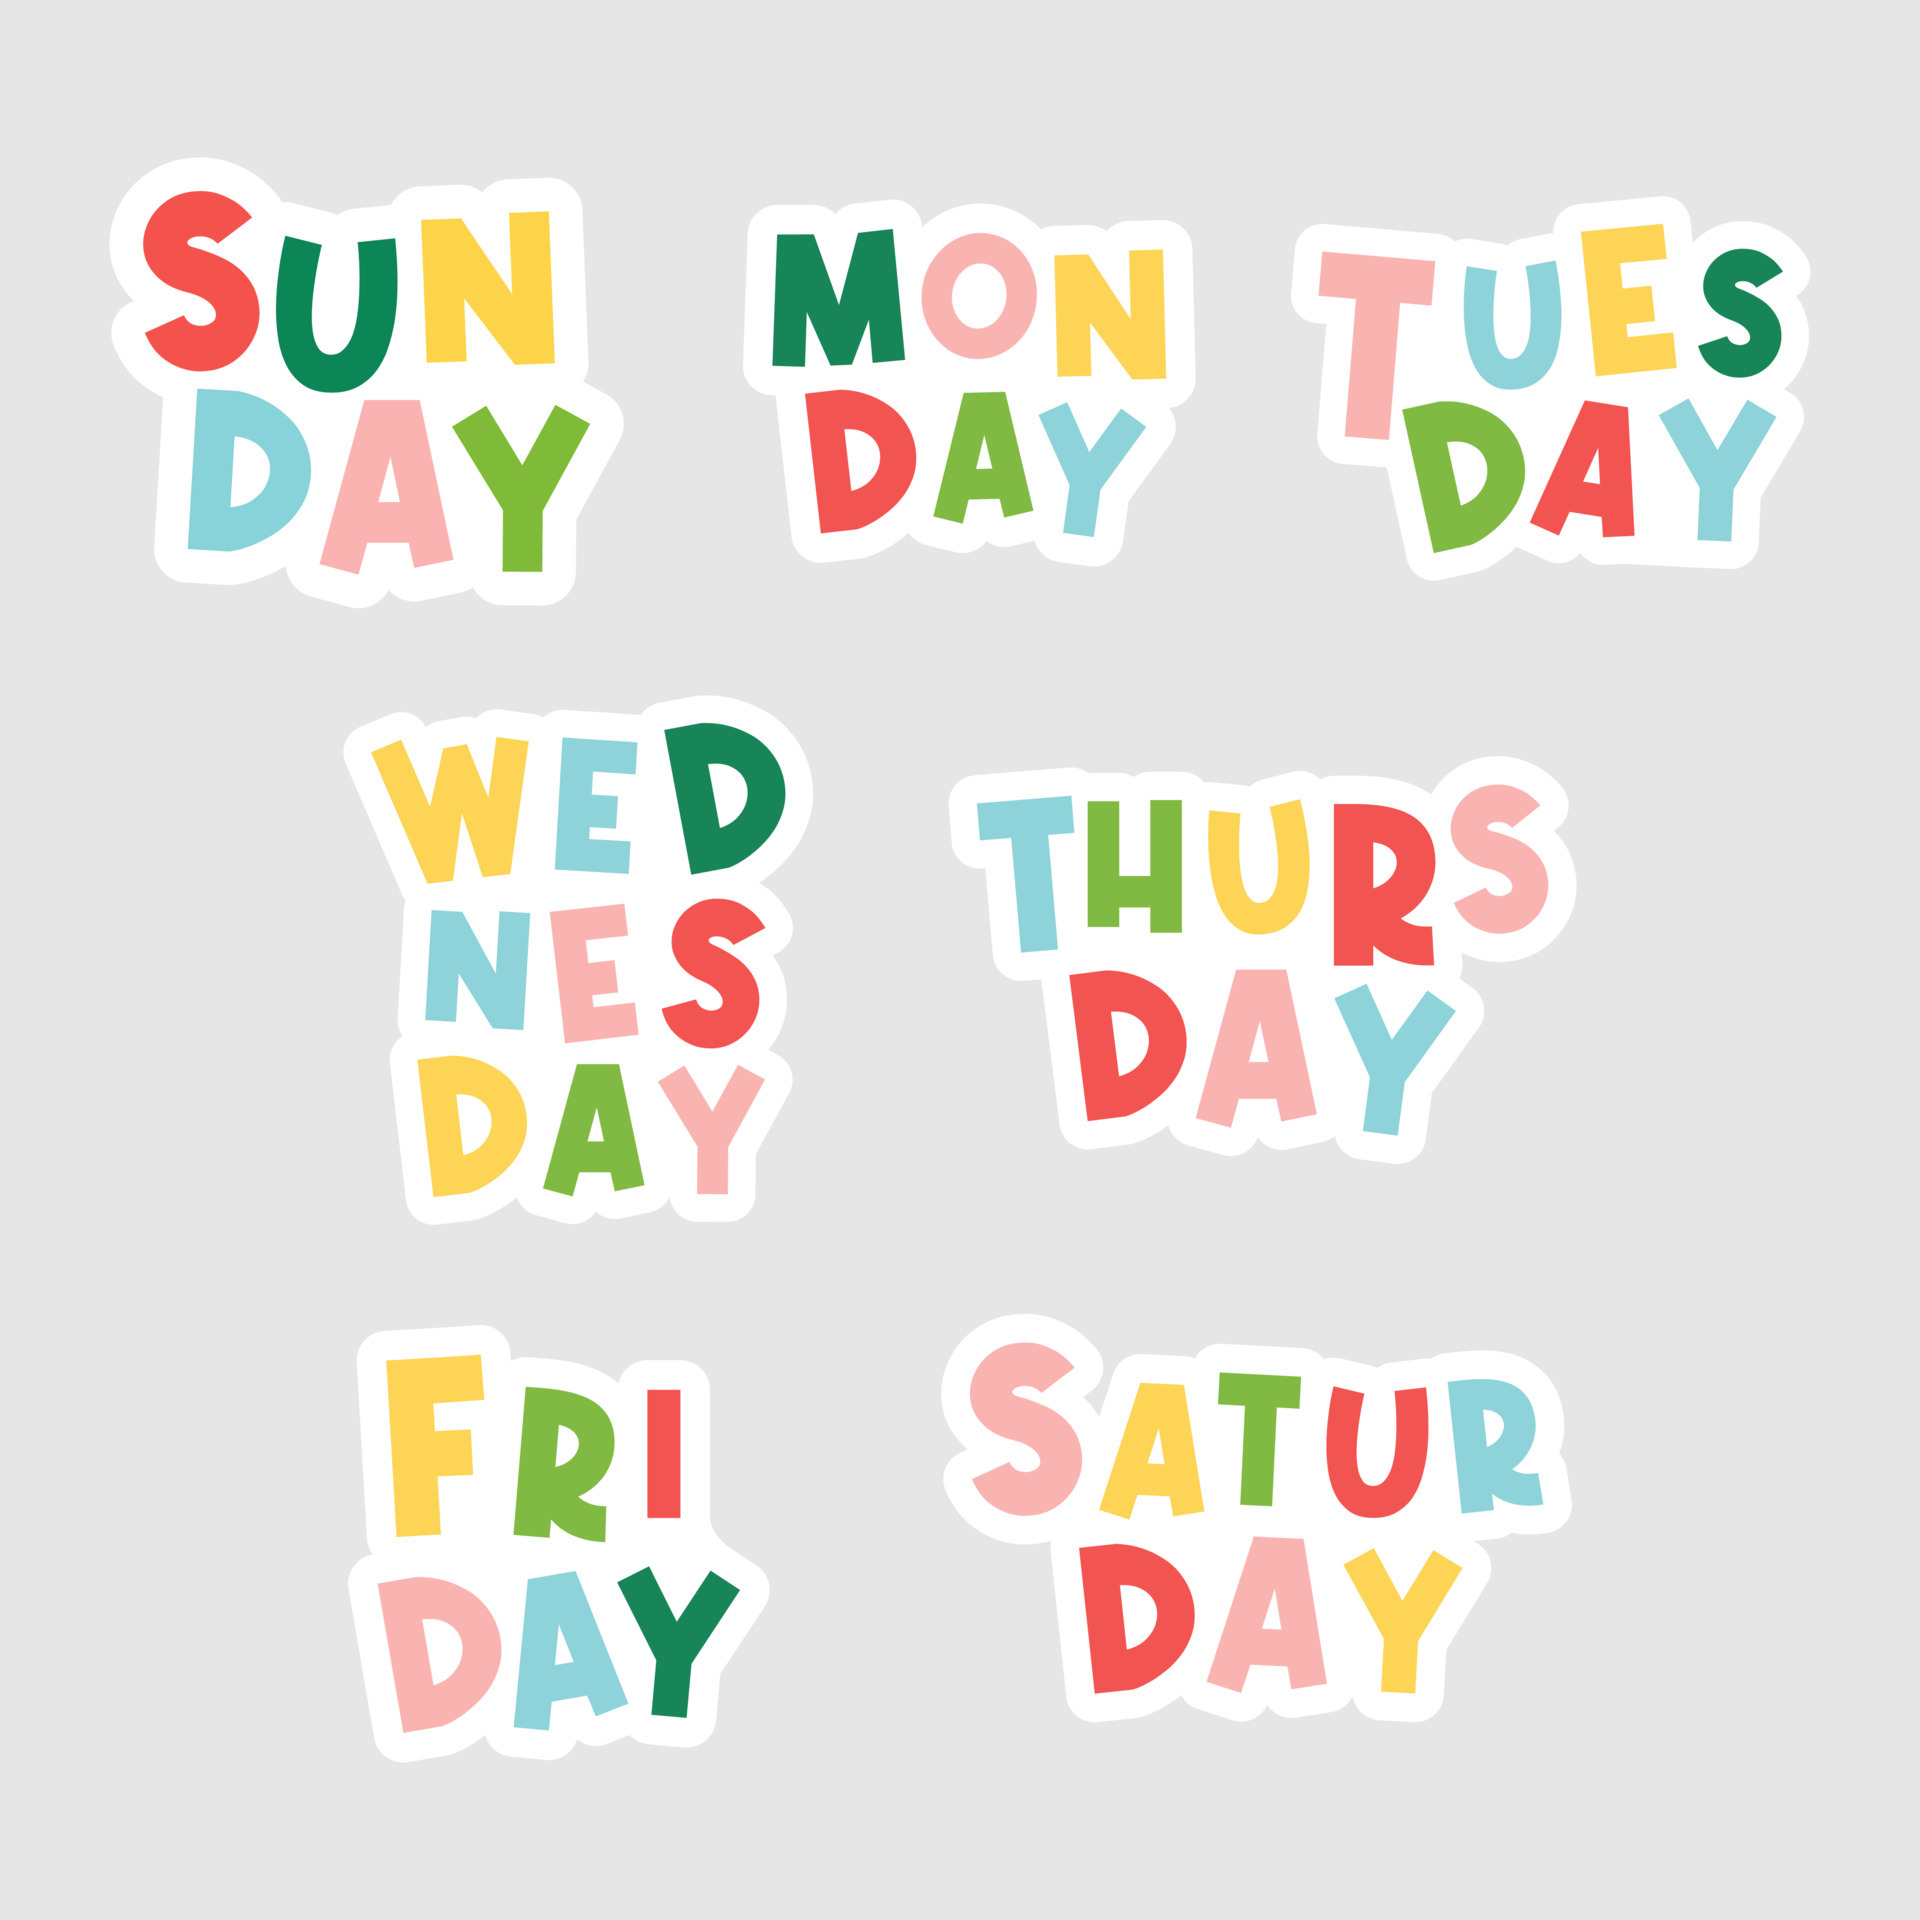 📅 Monday, Tuesday, Wednesday [ Days of the week ]